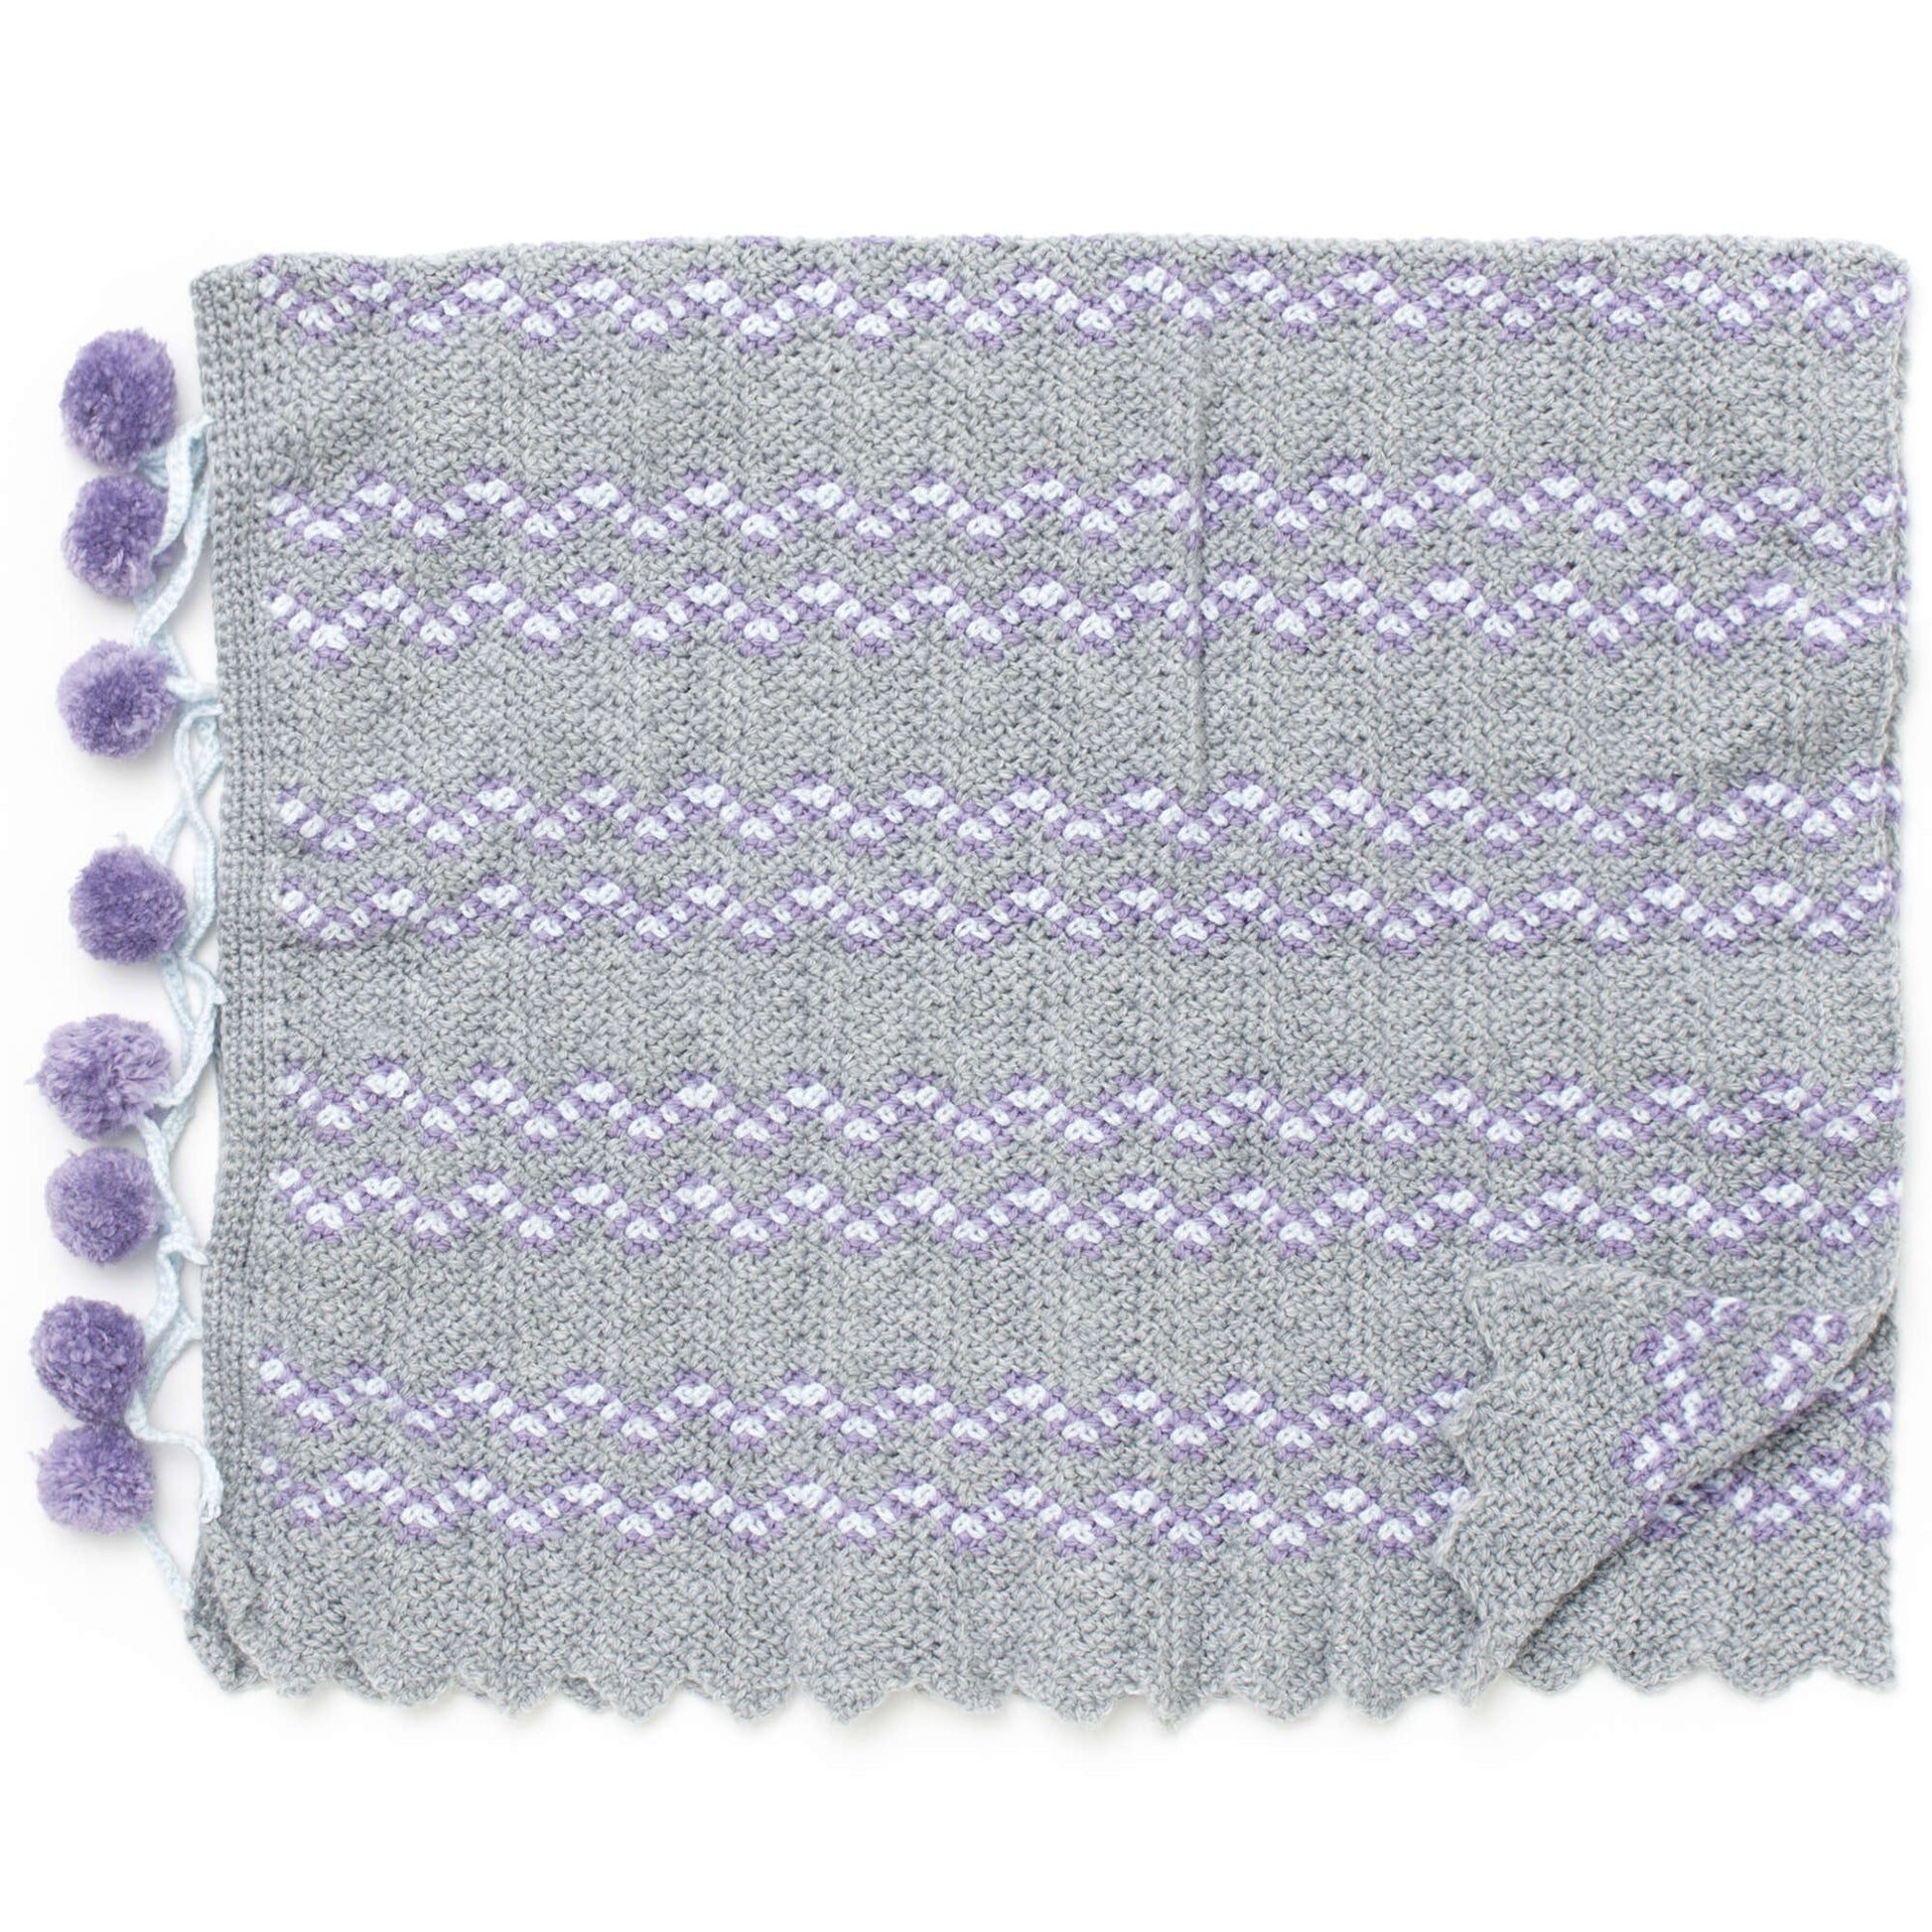 Free Patons Pompoms And Ripples Crochet Blanket Pattern